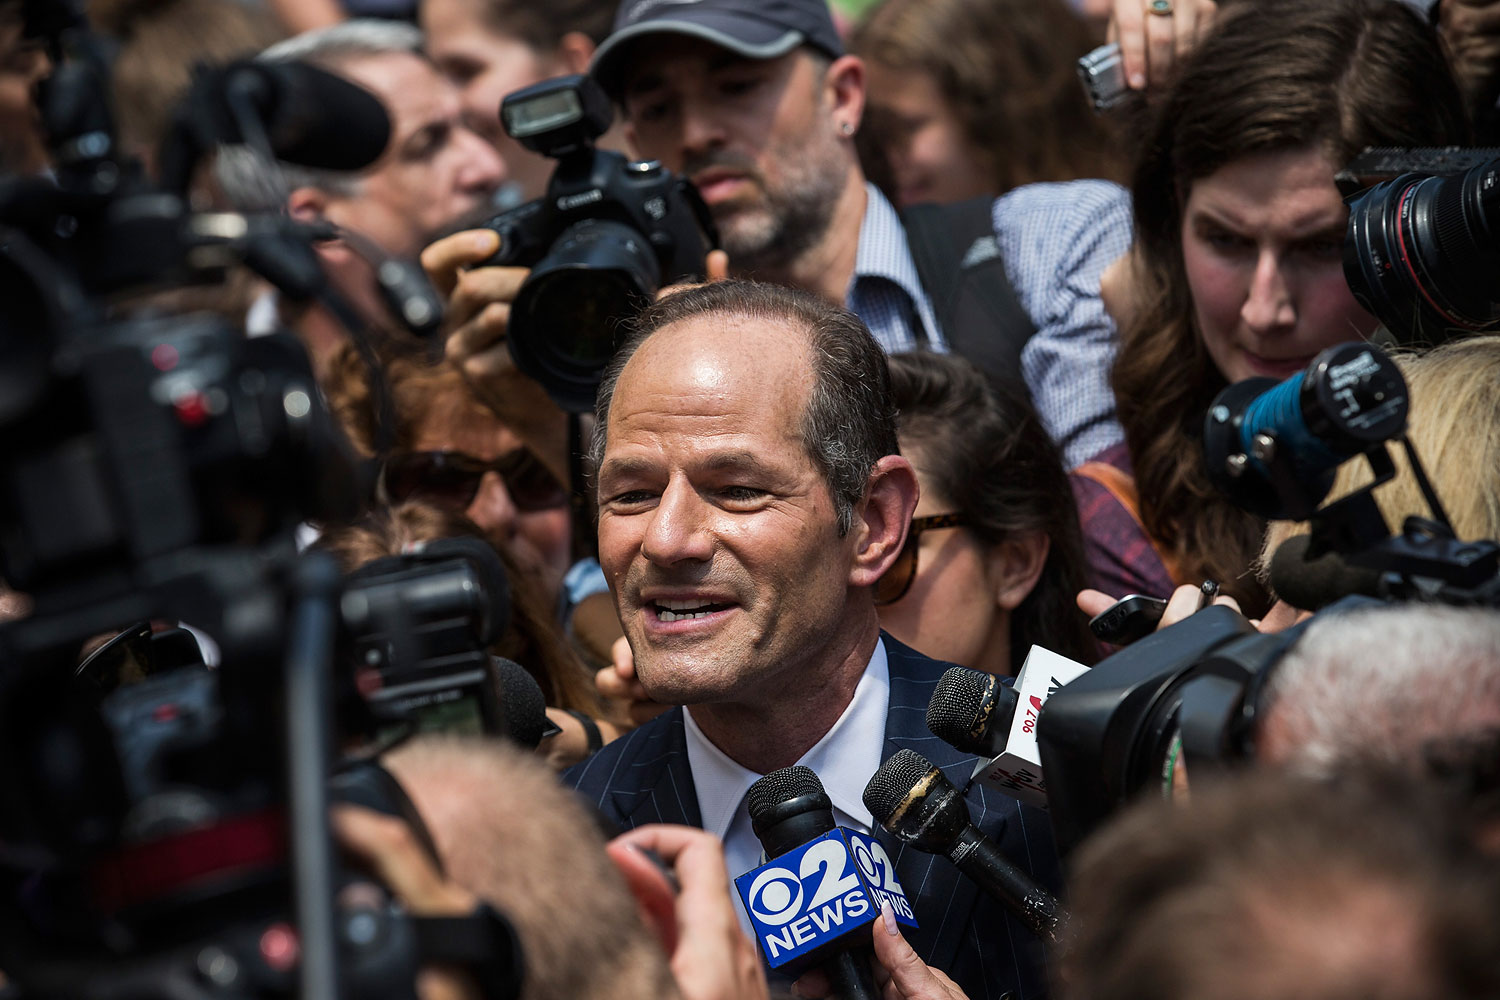 Former New York governor Eliot Spitzer is mobbed by reporters while attempting to collect signatures to run for comptroller of New York City on July 8, 2013, in New York City (Andrew Burton / Getty Images)